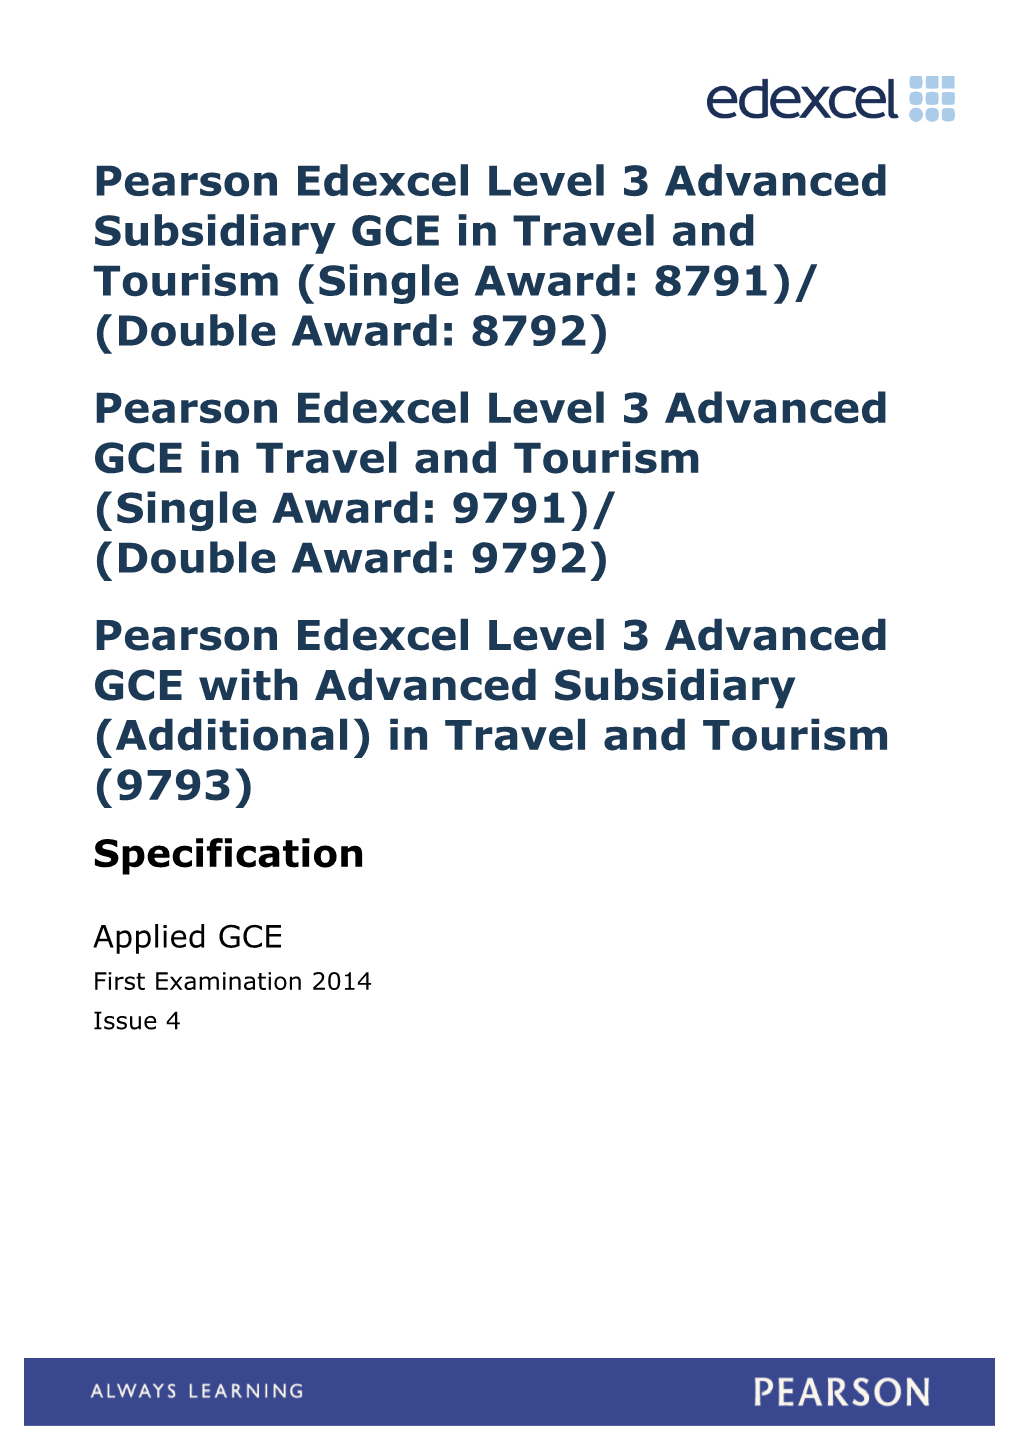 Advanced GCE in Travel and Tourism Specification